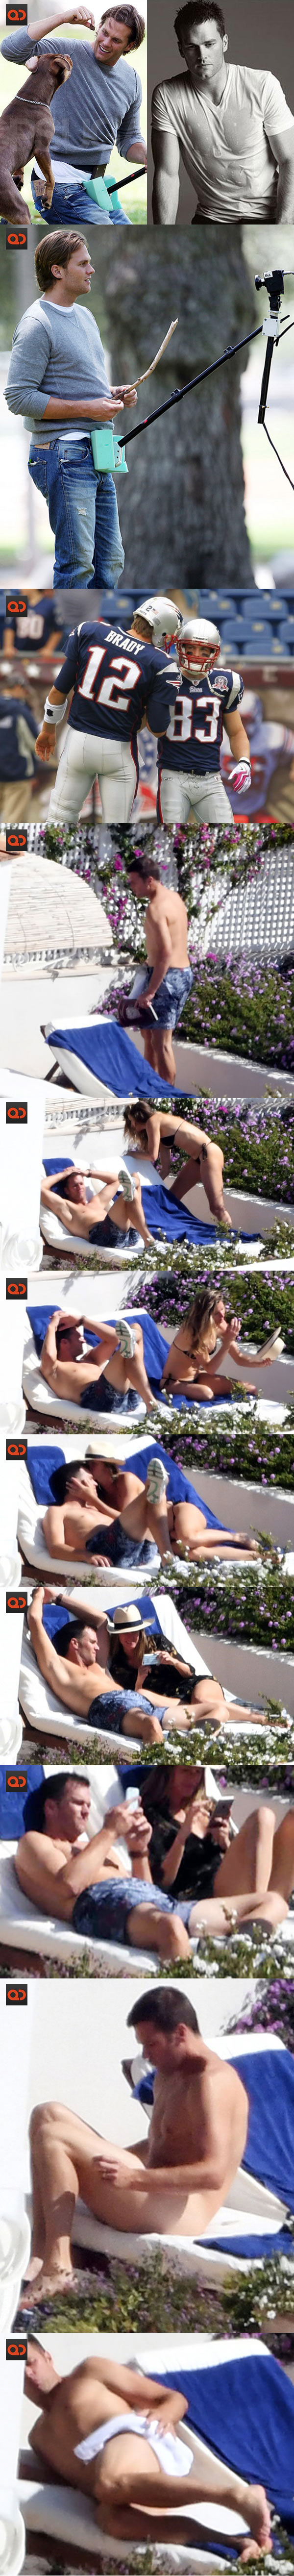 Tom Brady Sunbaths In The Nude During His Italian “Vacation” - Grainy Image Of His Cock Surfaces!